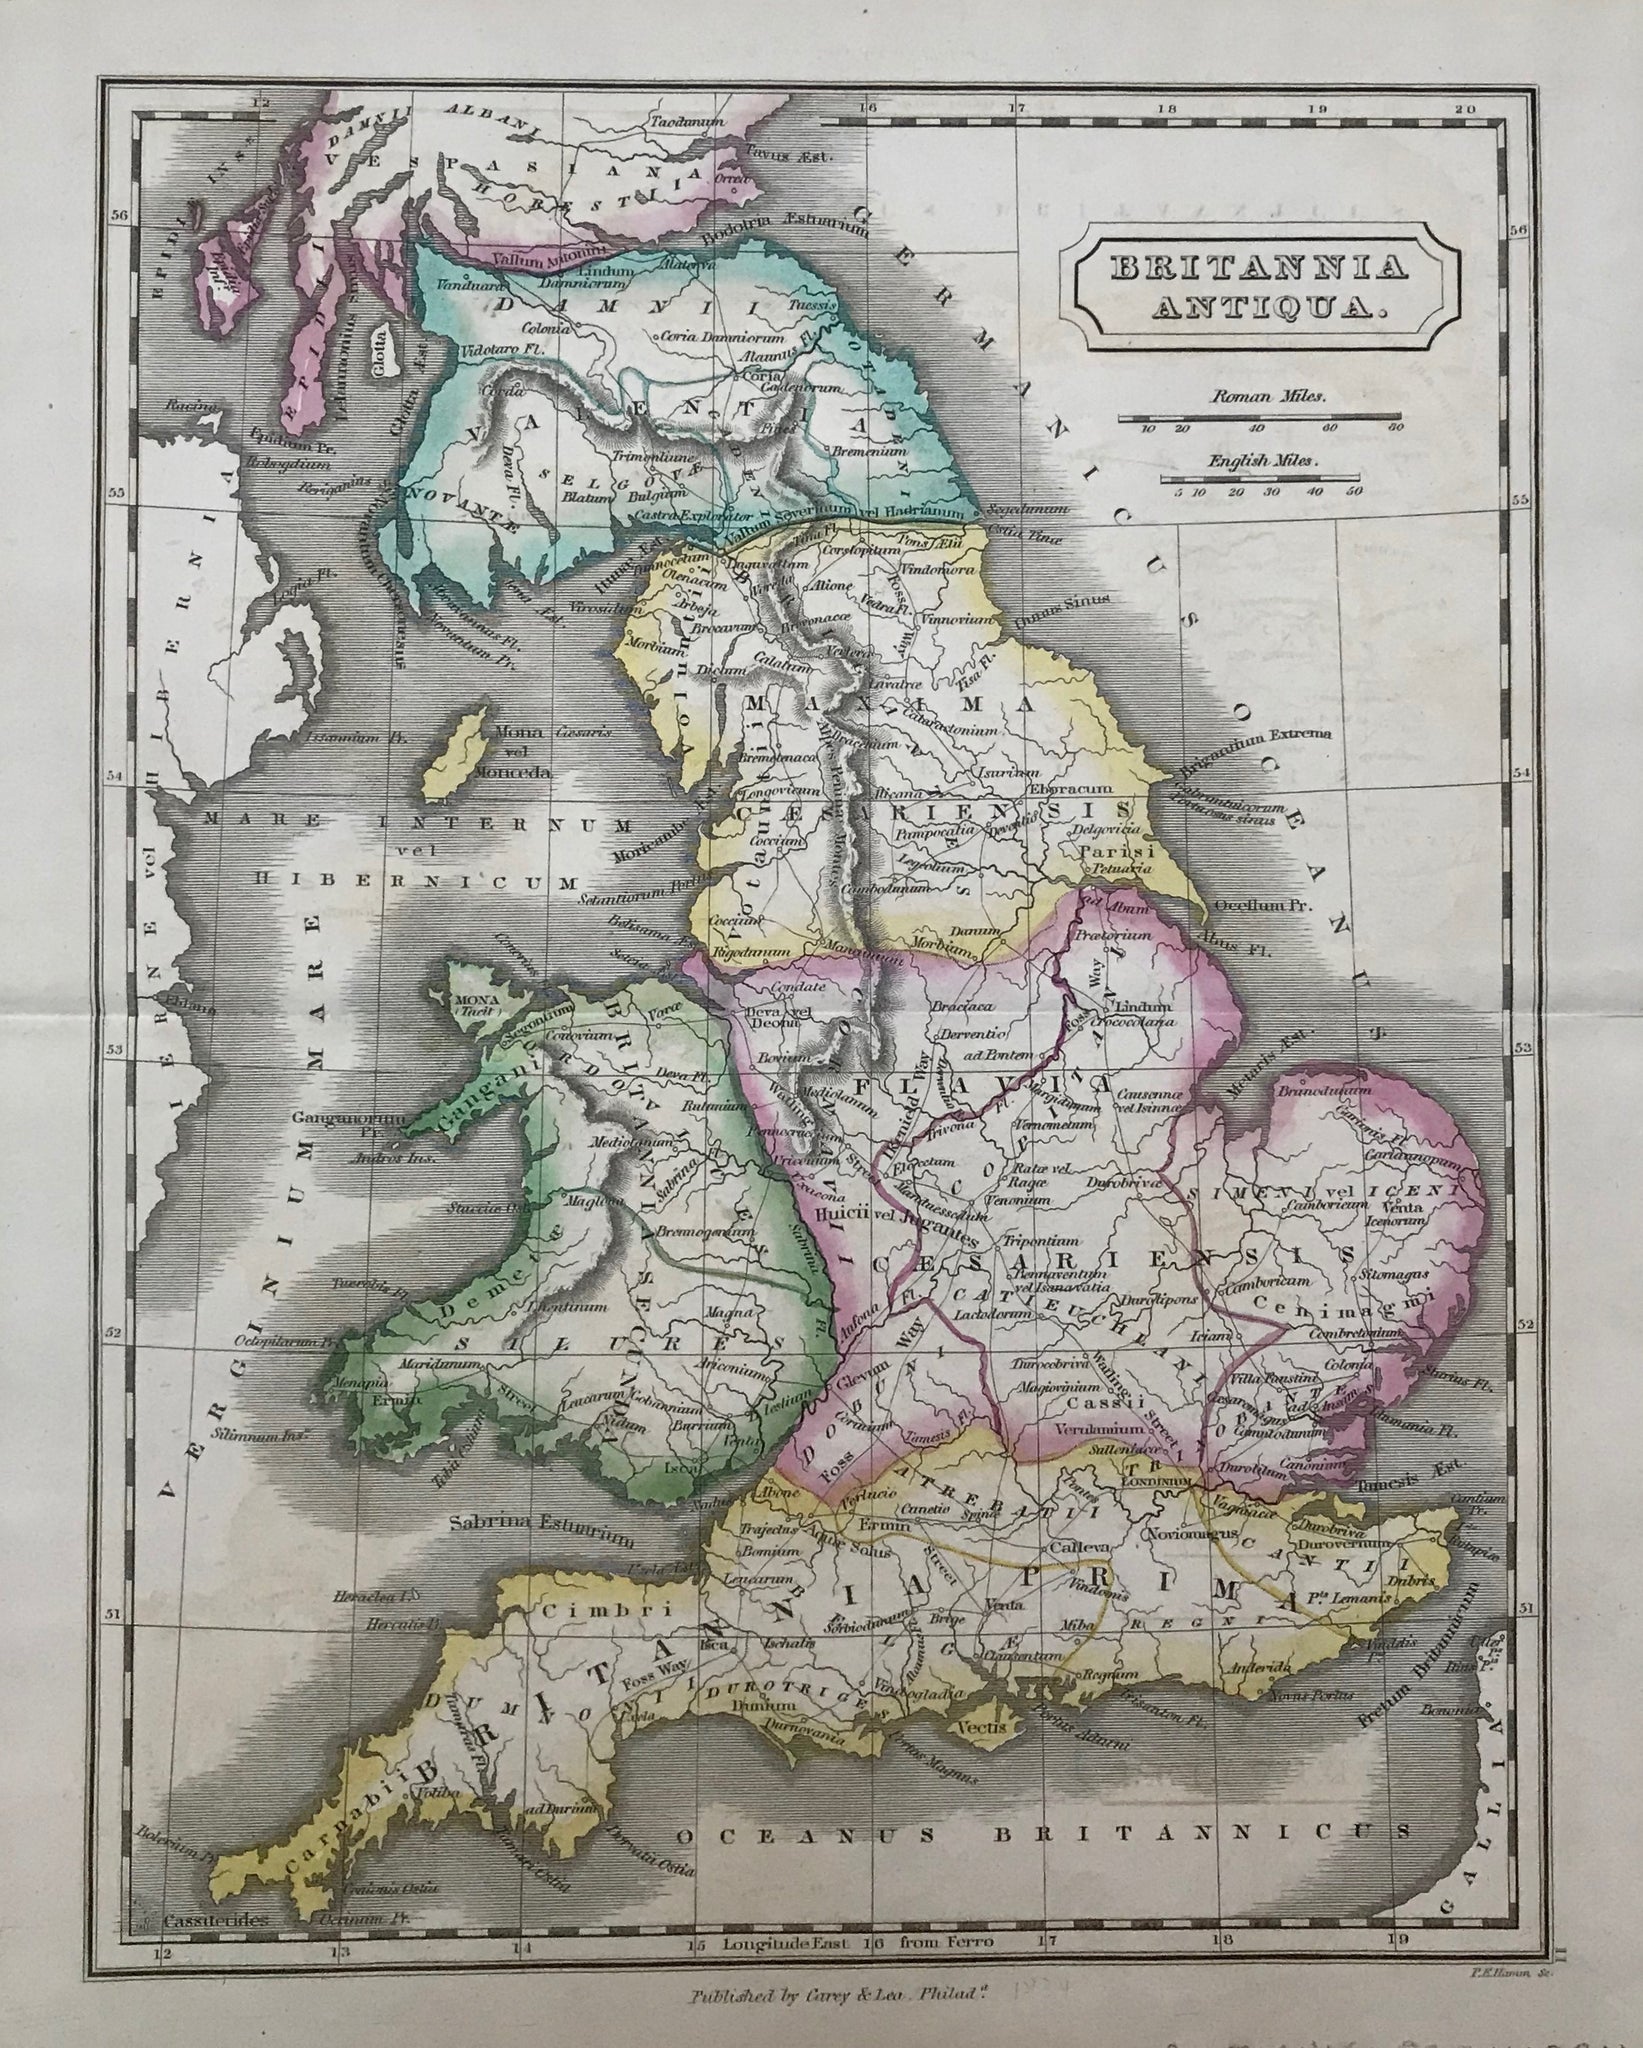 "Britannia Antiqua"  Engraved by P. E. Hamm for "The Atlas of Ancient Geography". Published in Philadelphia by Lea and Blanchard, 1844.  Original hand coloring. Horizontal centerfold to fit original abook size. Light age toning.